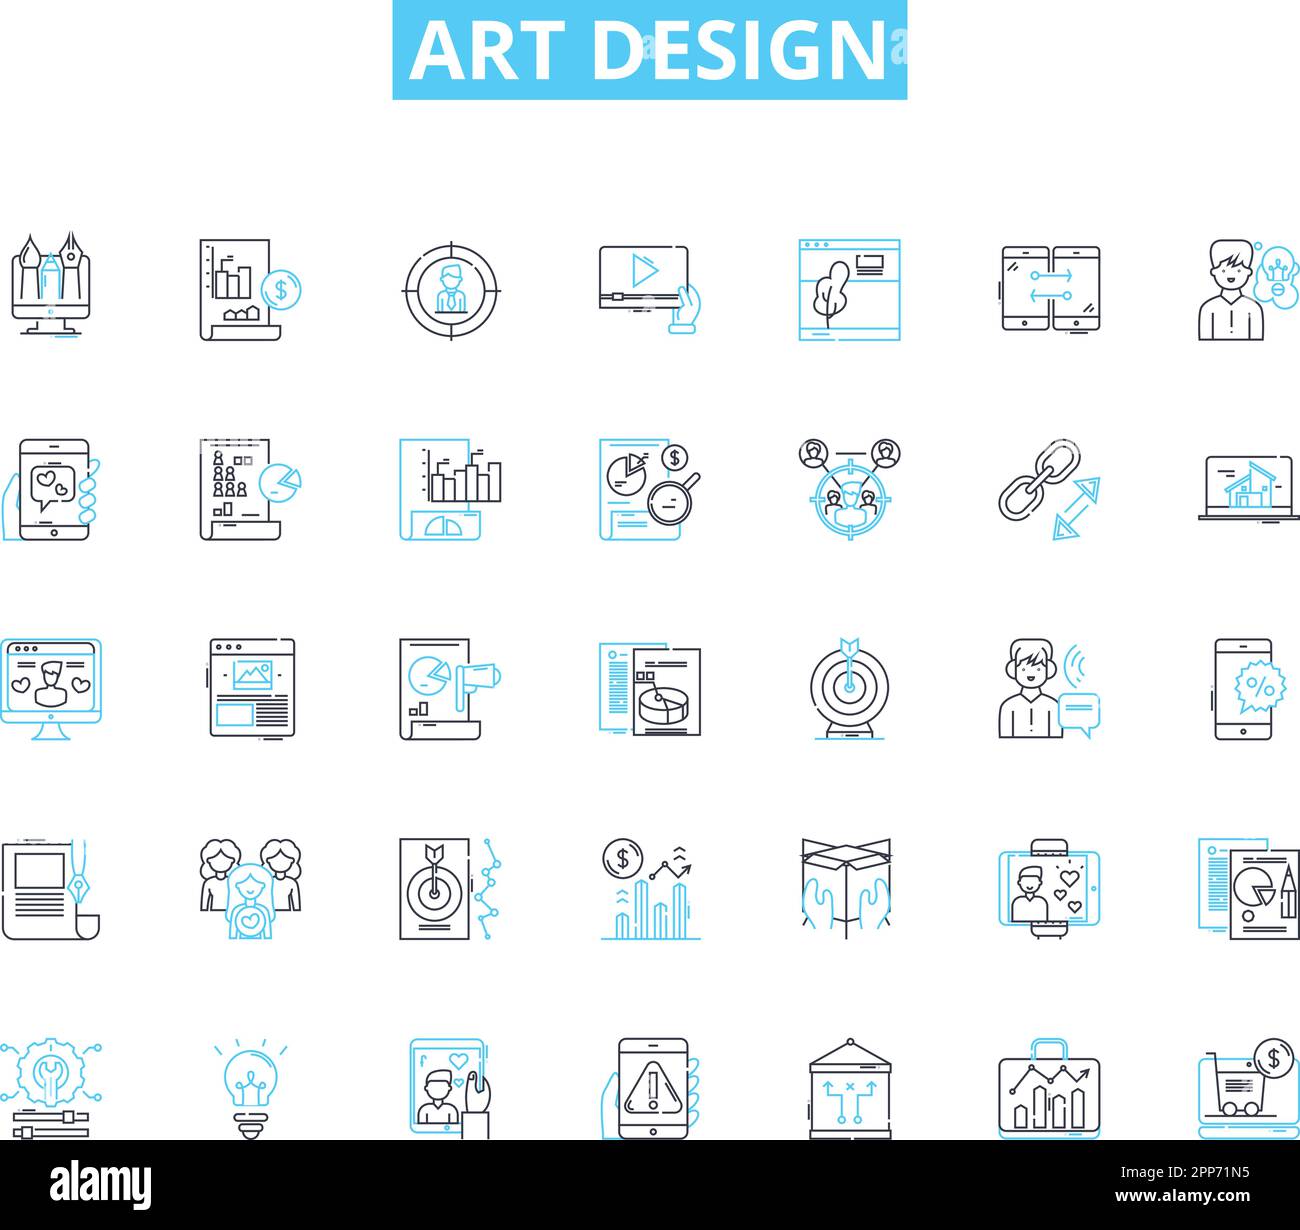 Art design linear icons set. Creativity, Imagination, Aesthetics, Visuals, Inspiration, Expression, Sketching line vector and concept signs. Graphics Stock Vector